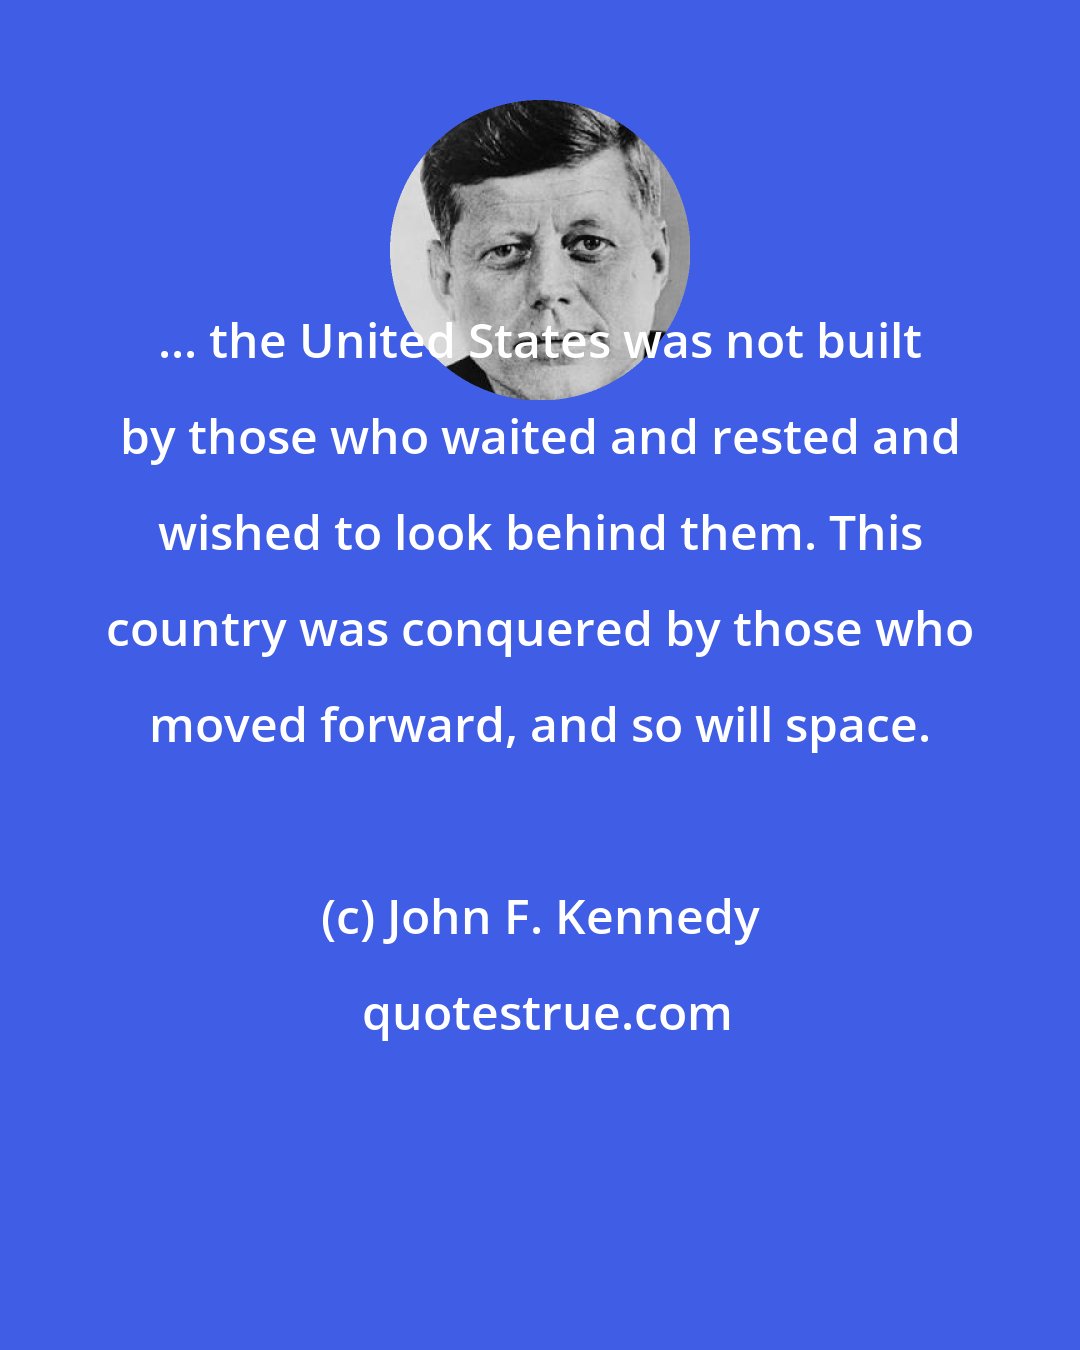 John F. Kennedy: ... the United States was not built by those who waited and rested and wished to look behind them. This country was conquered by those who moved forward, and so will space.